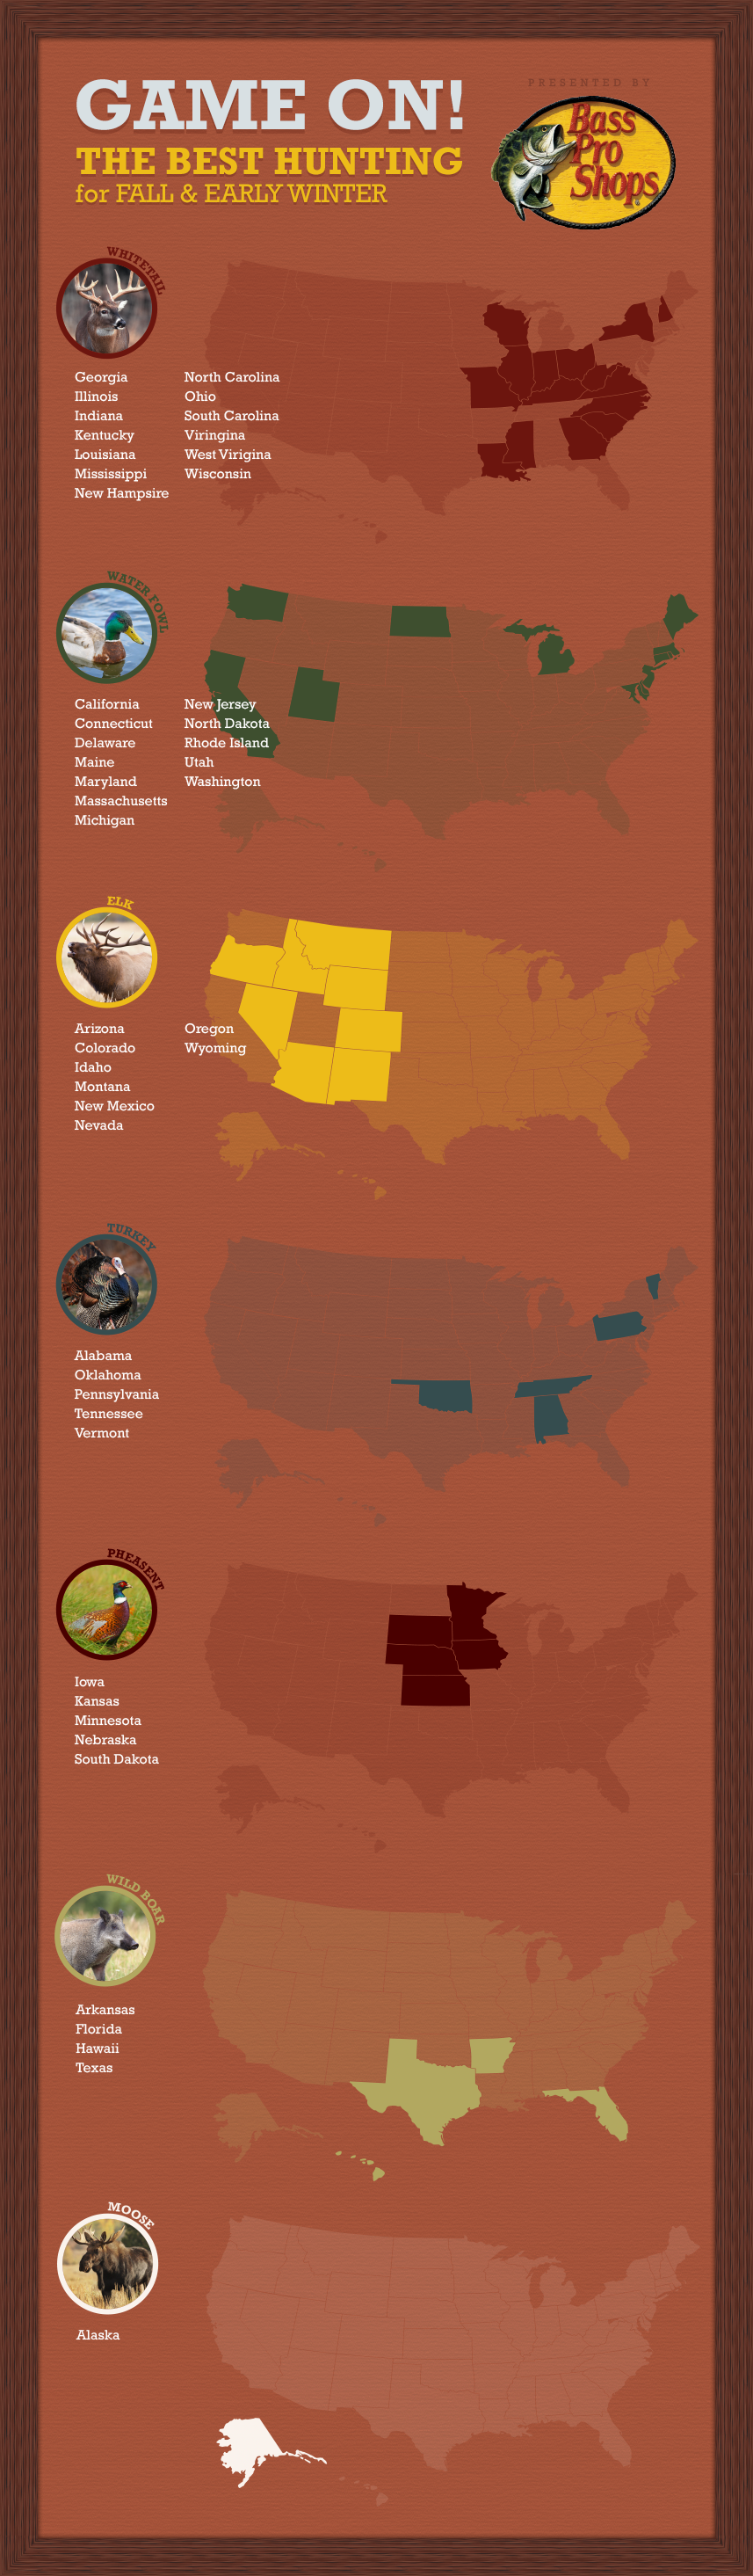 The Best Hunting States for Fall & Early Winter (infographic) Bass